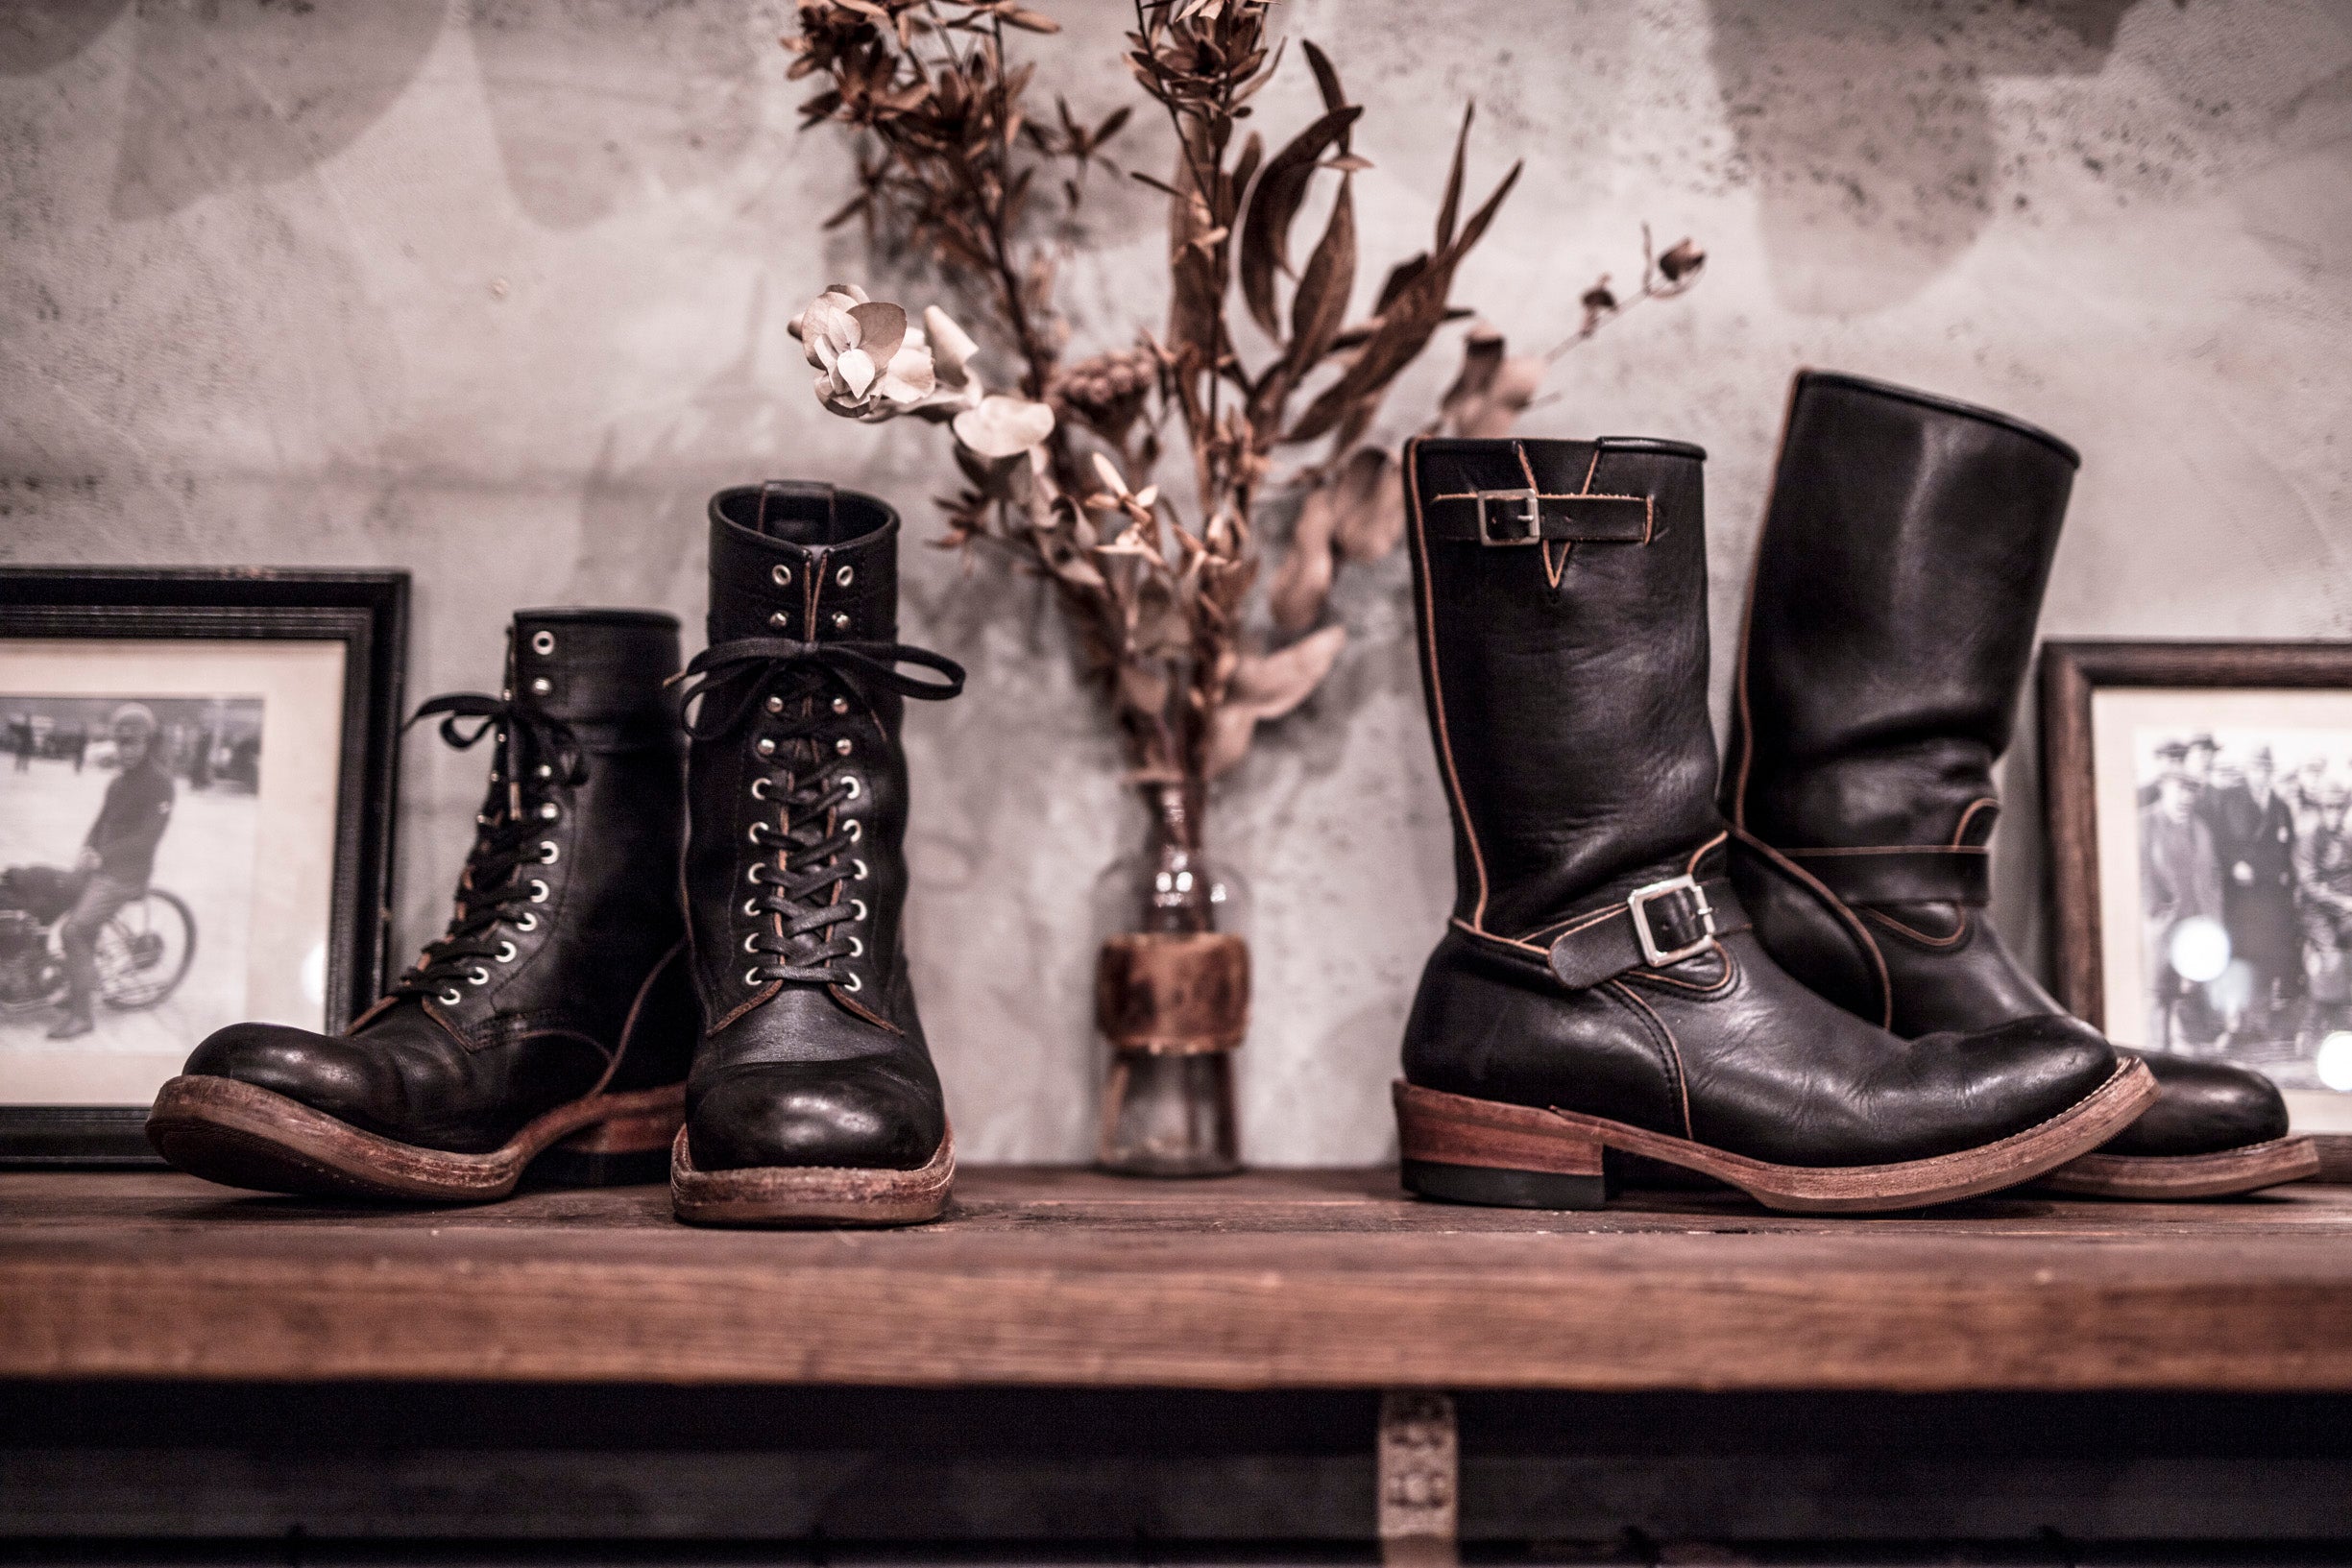 May club -【Addict Clothes】AD-S-01 STEERHIDE ENGINEER BOOTS - BLACK